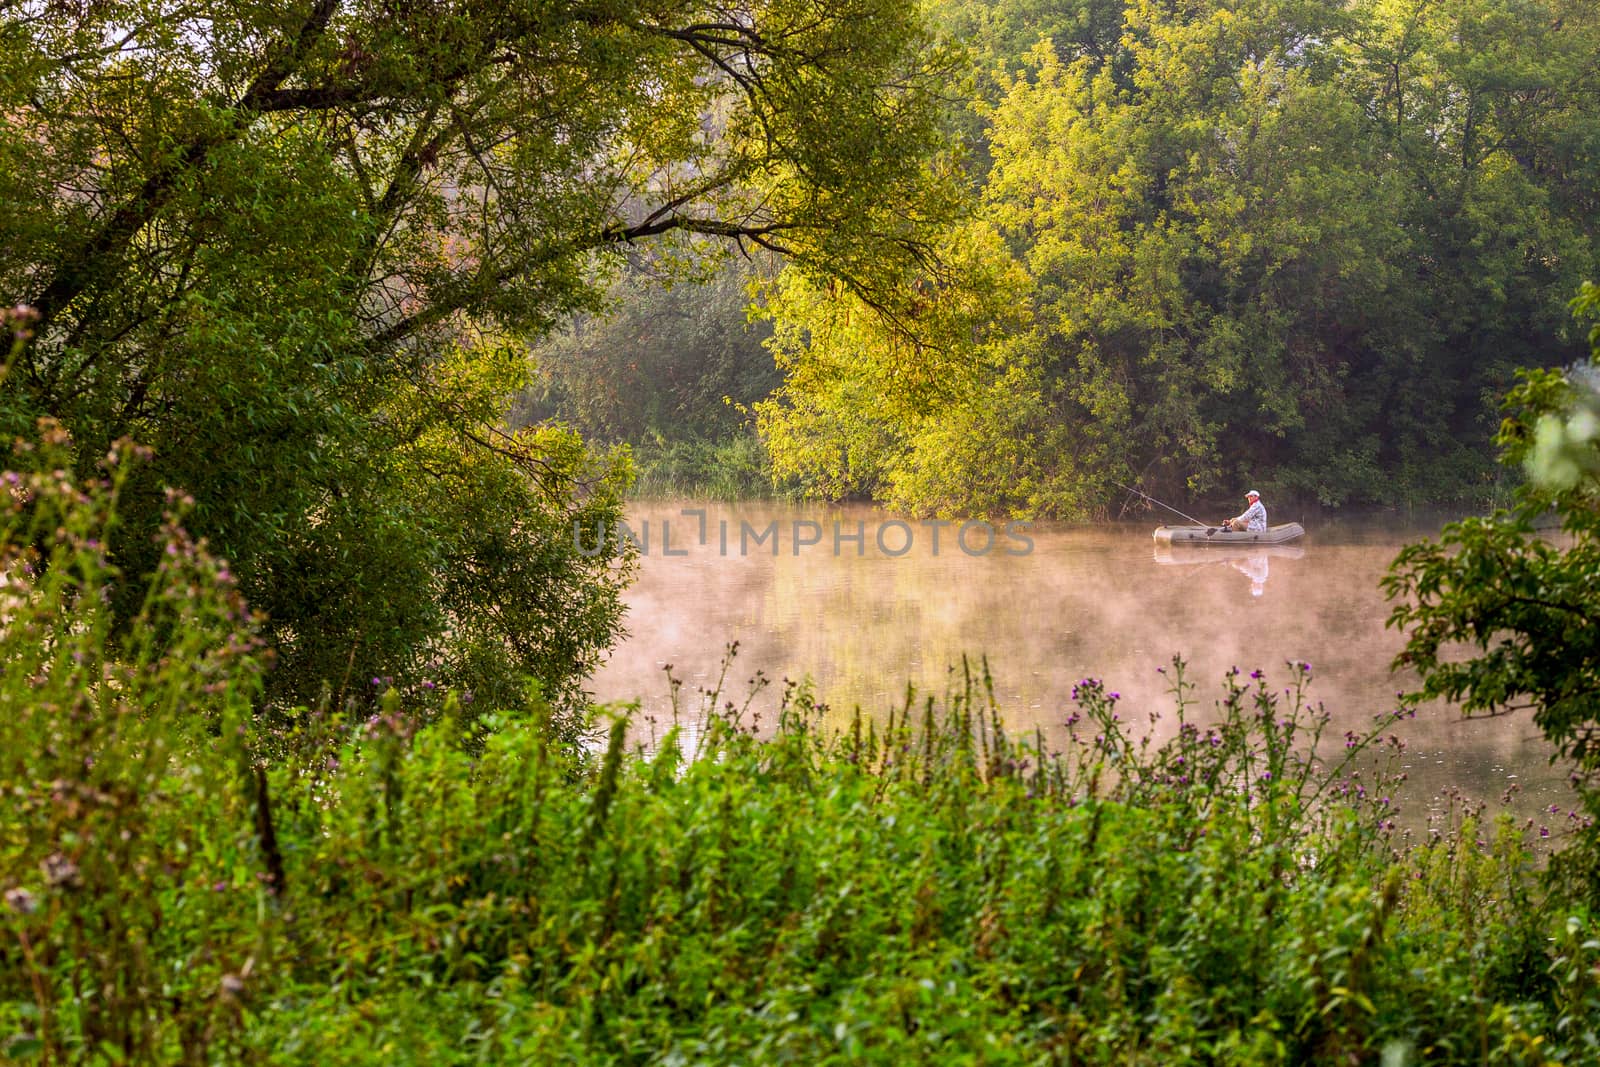 TULA, RUSSIA - AUGUST 12, 2013: A man fishing on river at inflatable boat at foggy summer morning under green foliage. by z1b